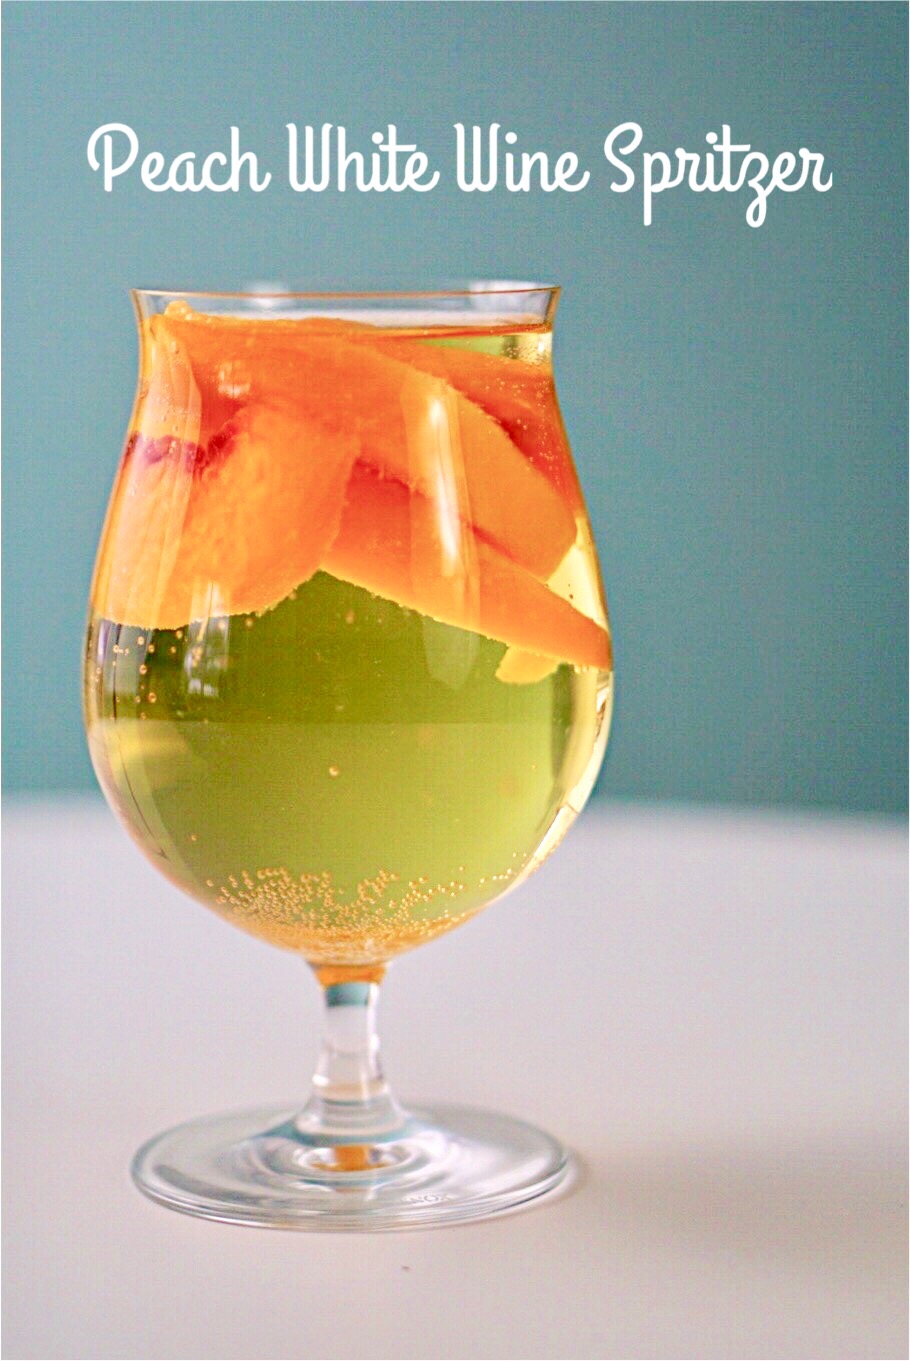 As spring appraoches, my mind finds itself wandering to warm, lazy, weekends. I am ready for flowers, sunshine and a peach white wine spritzer~By Wet Whislte Drinks by Darla Bentley